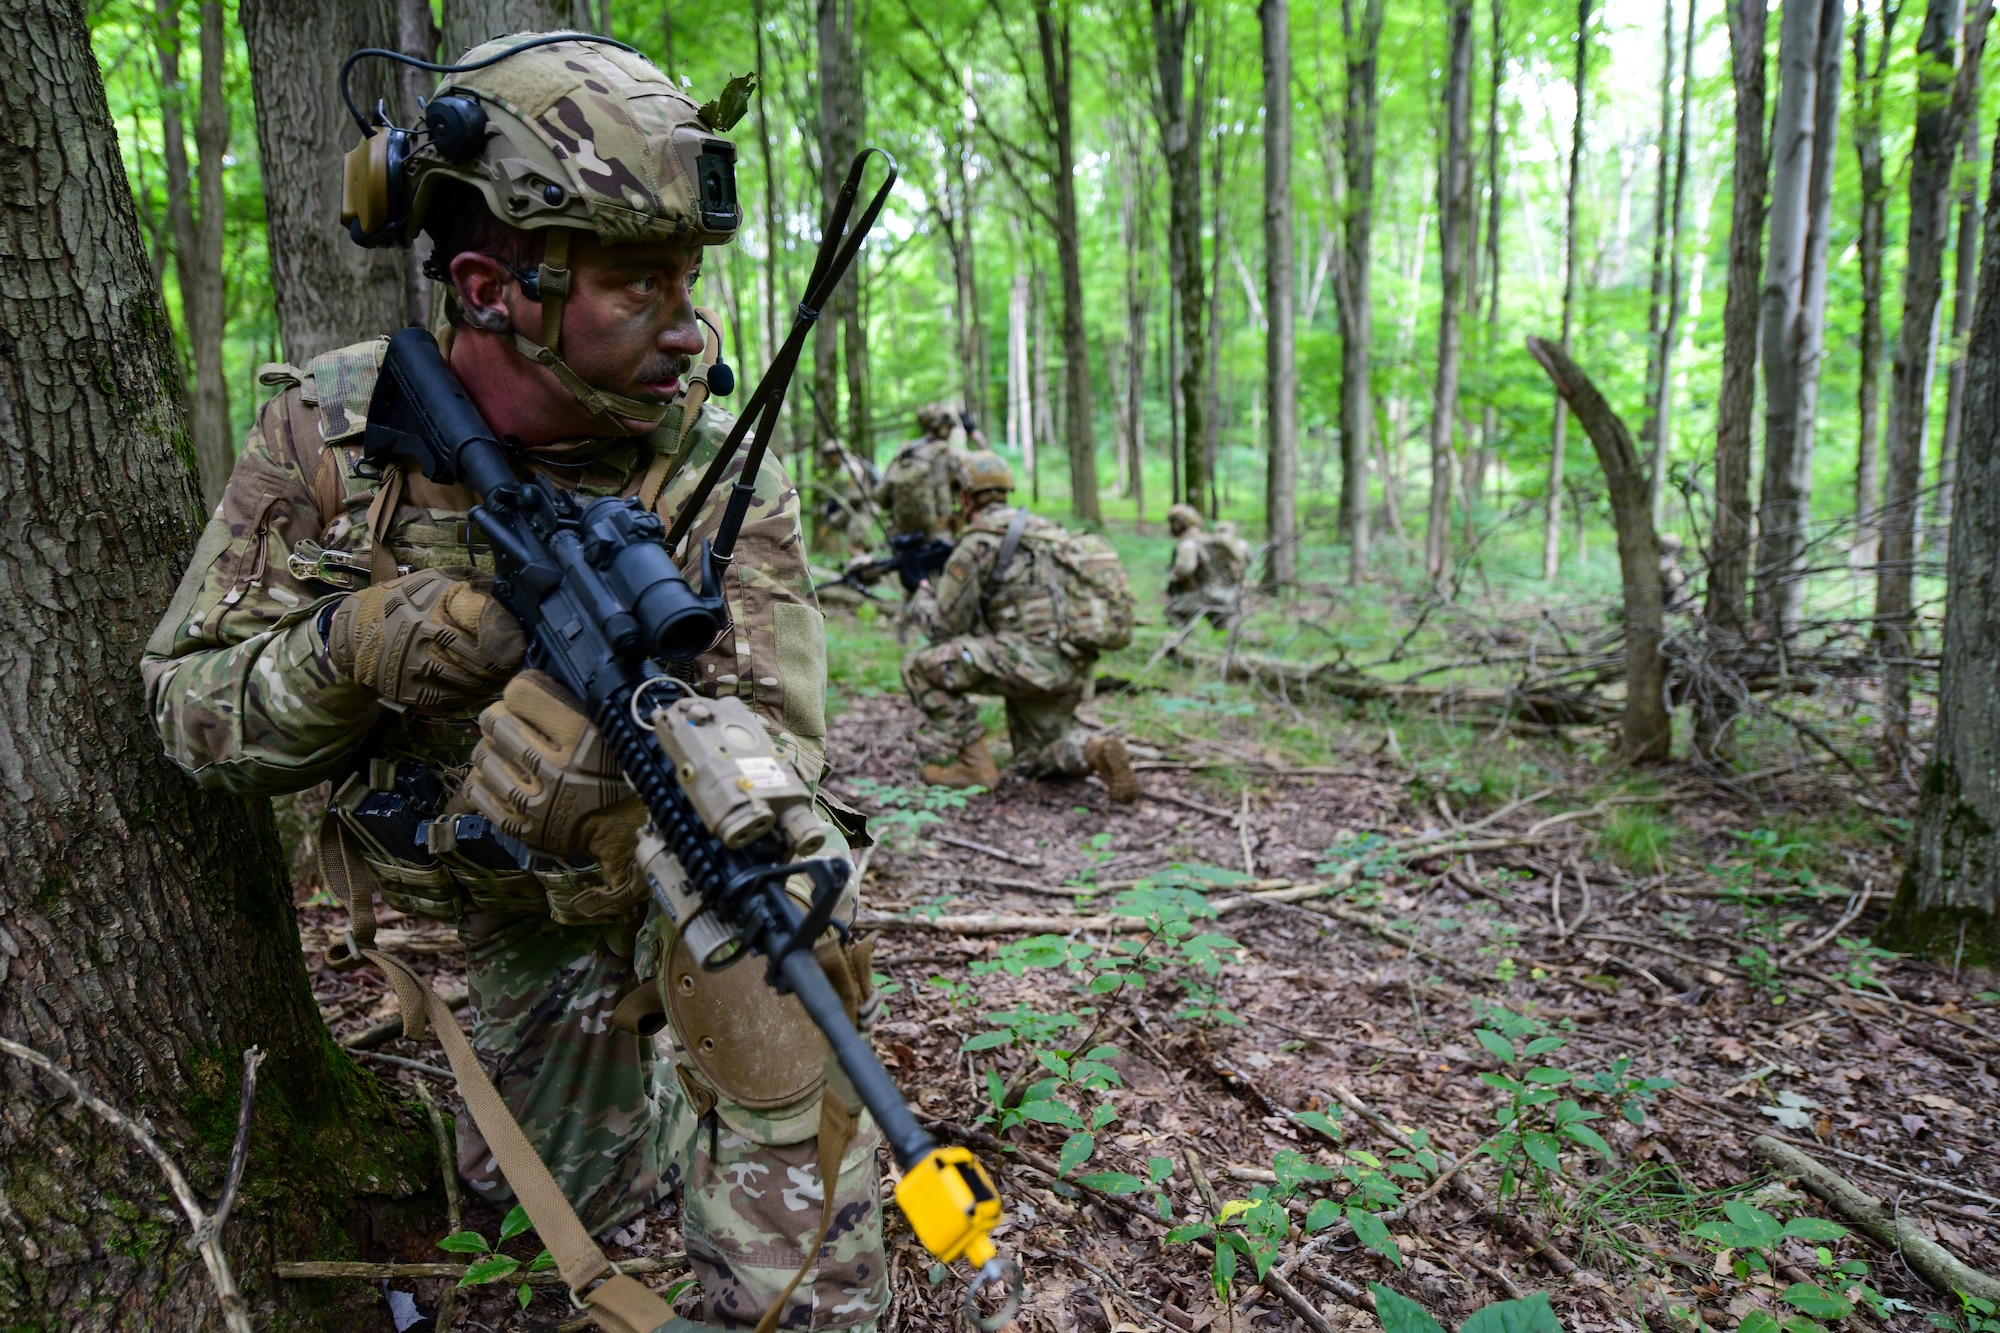 Staff Sgt. Justin Ryan, an Integrated Defense Leadership Course student assigned to the 927th Security Forces Squadron, MacDill Air Force Base, Florida, remains alert during an area security operations exercise at Camp James A. Garfield Joint Military Training Center, Ohio, July 27, 2022.